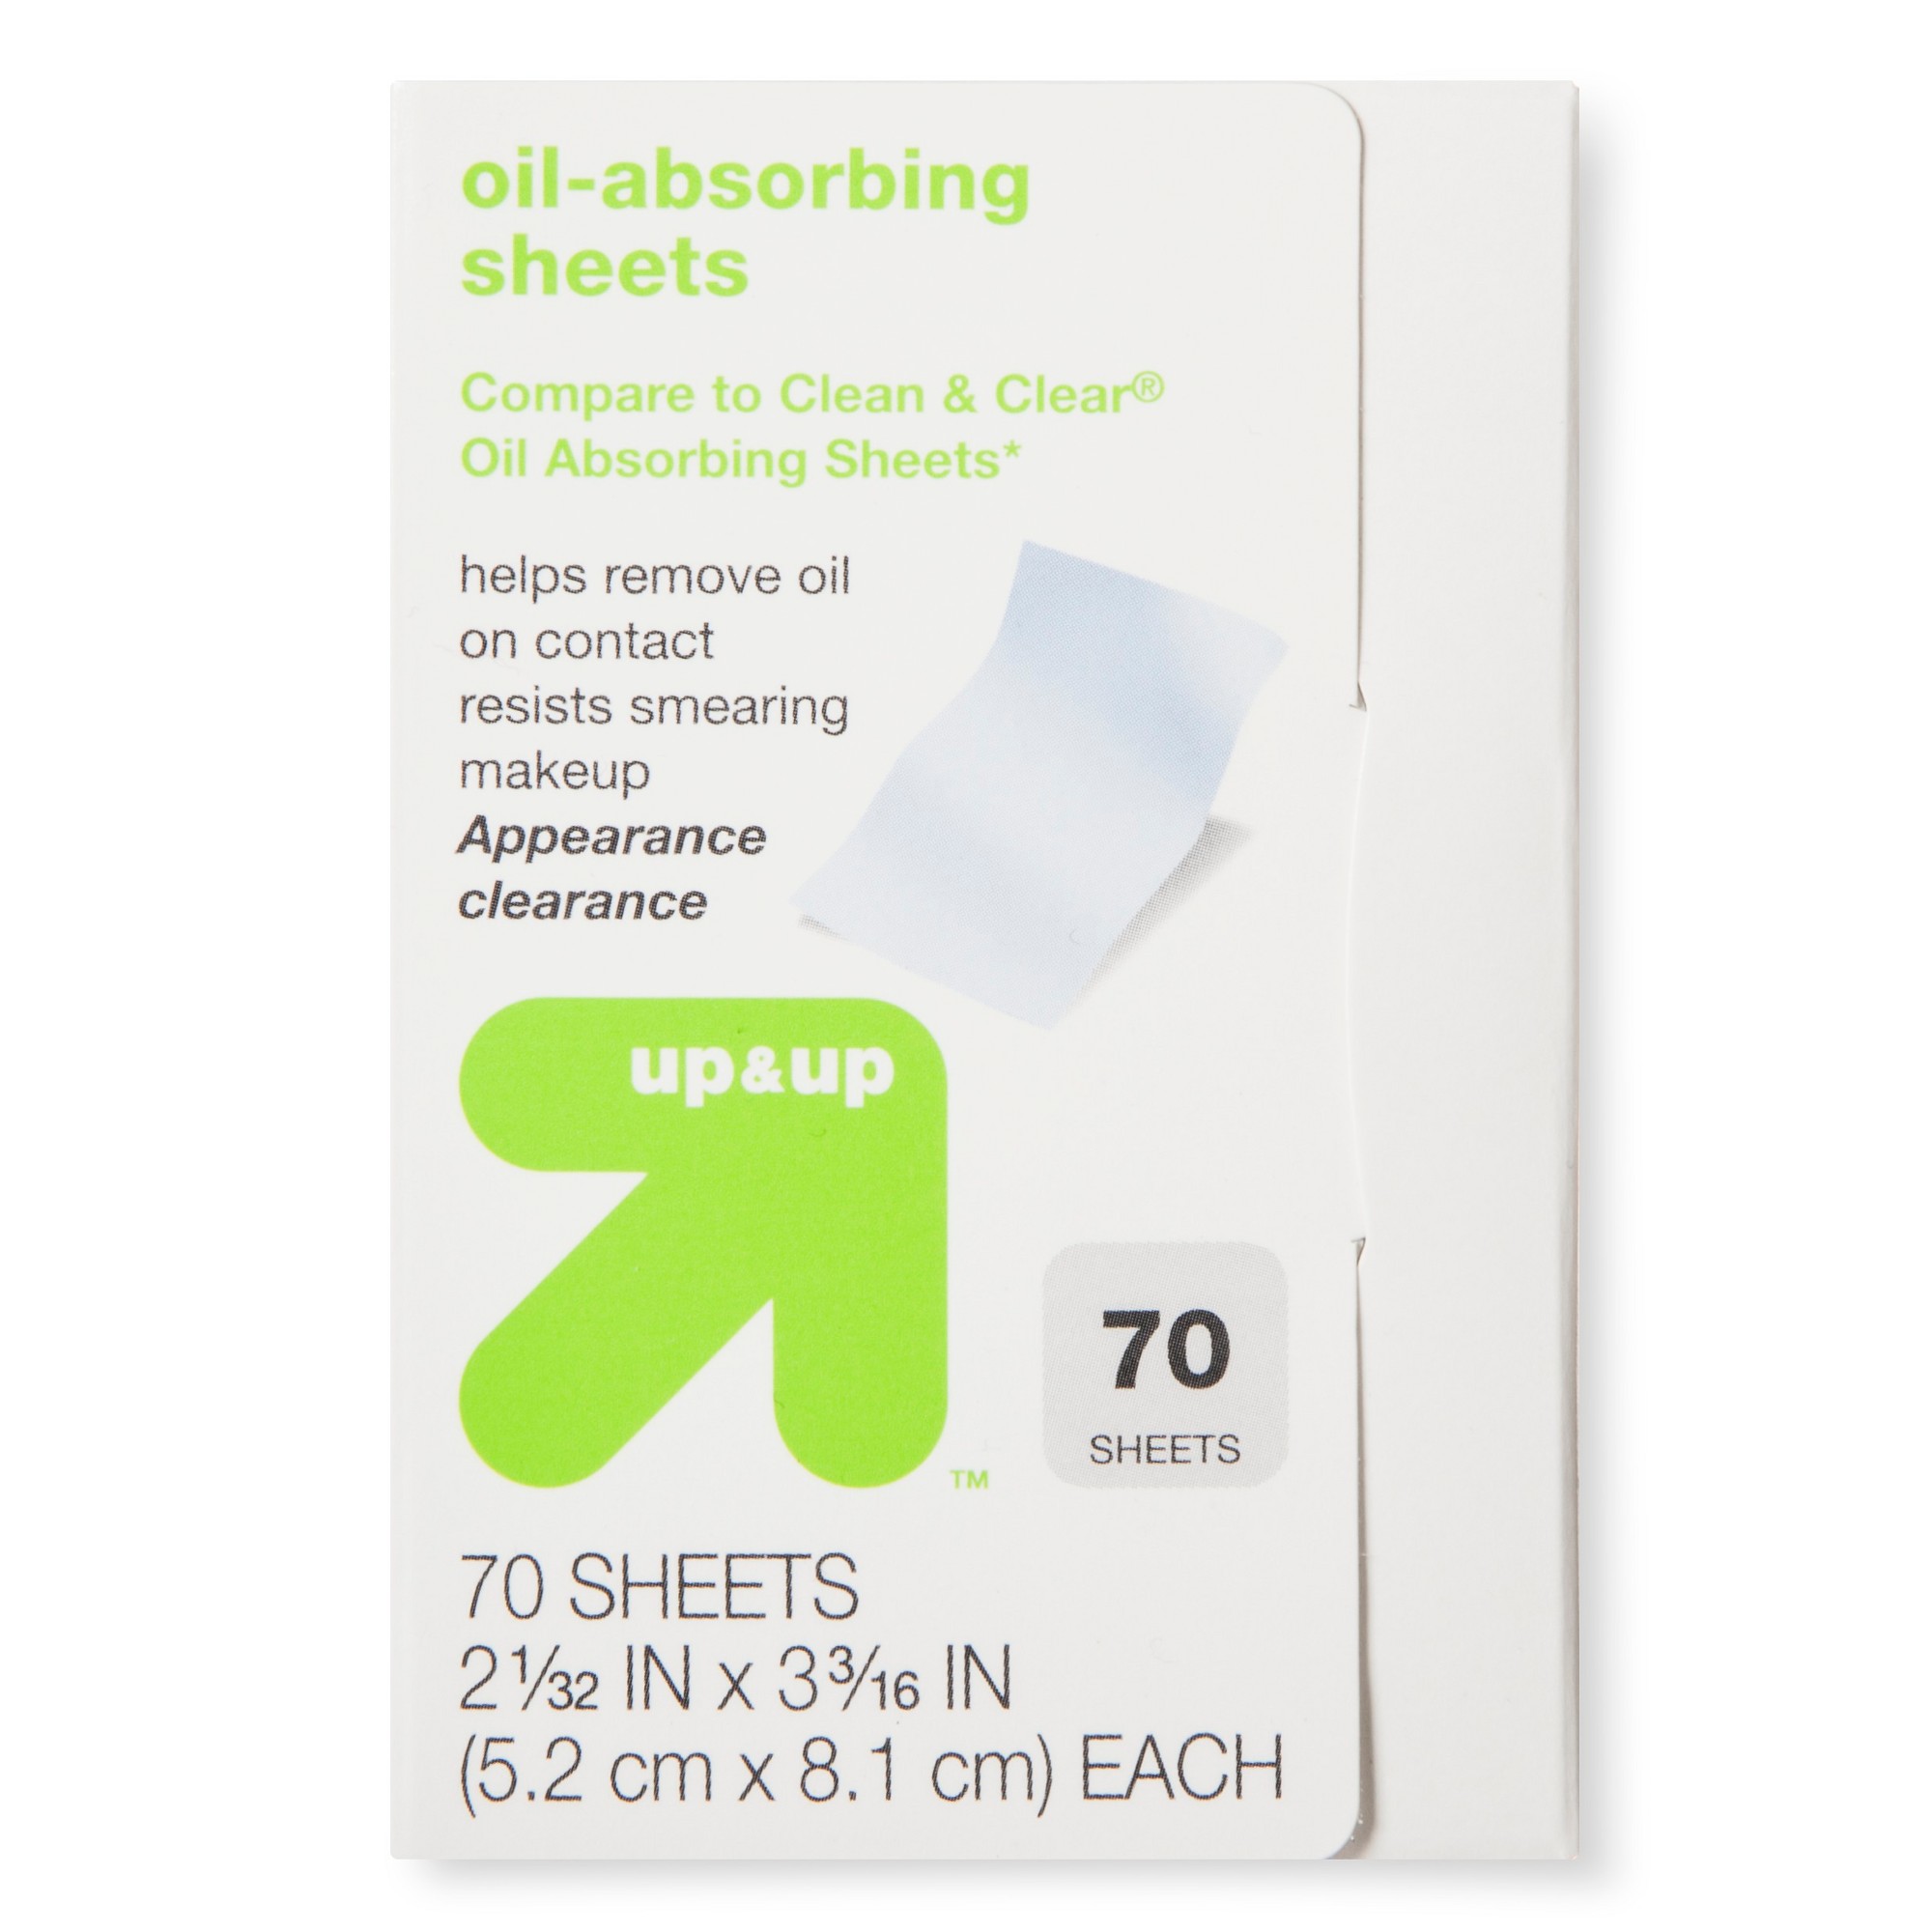 Oil Absorbing Sheets - 70ct - Up&Up (Compare to Clean & Clear Oil Absorbing Sheets)